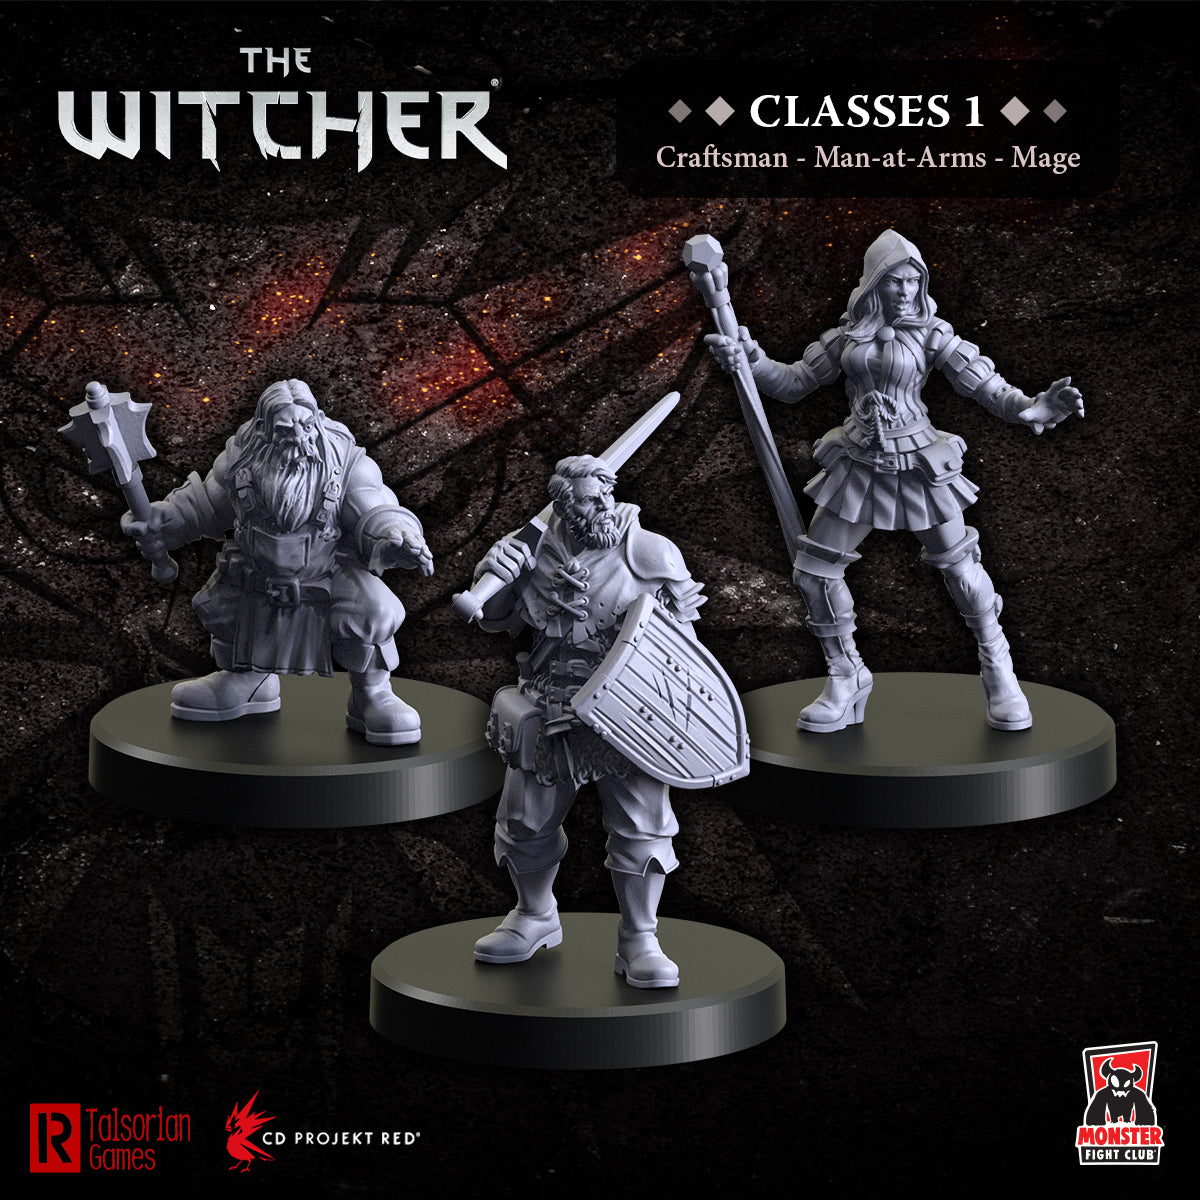 The Witcher - Professions 1: Craftsman, Man-at-Arms, Mage